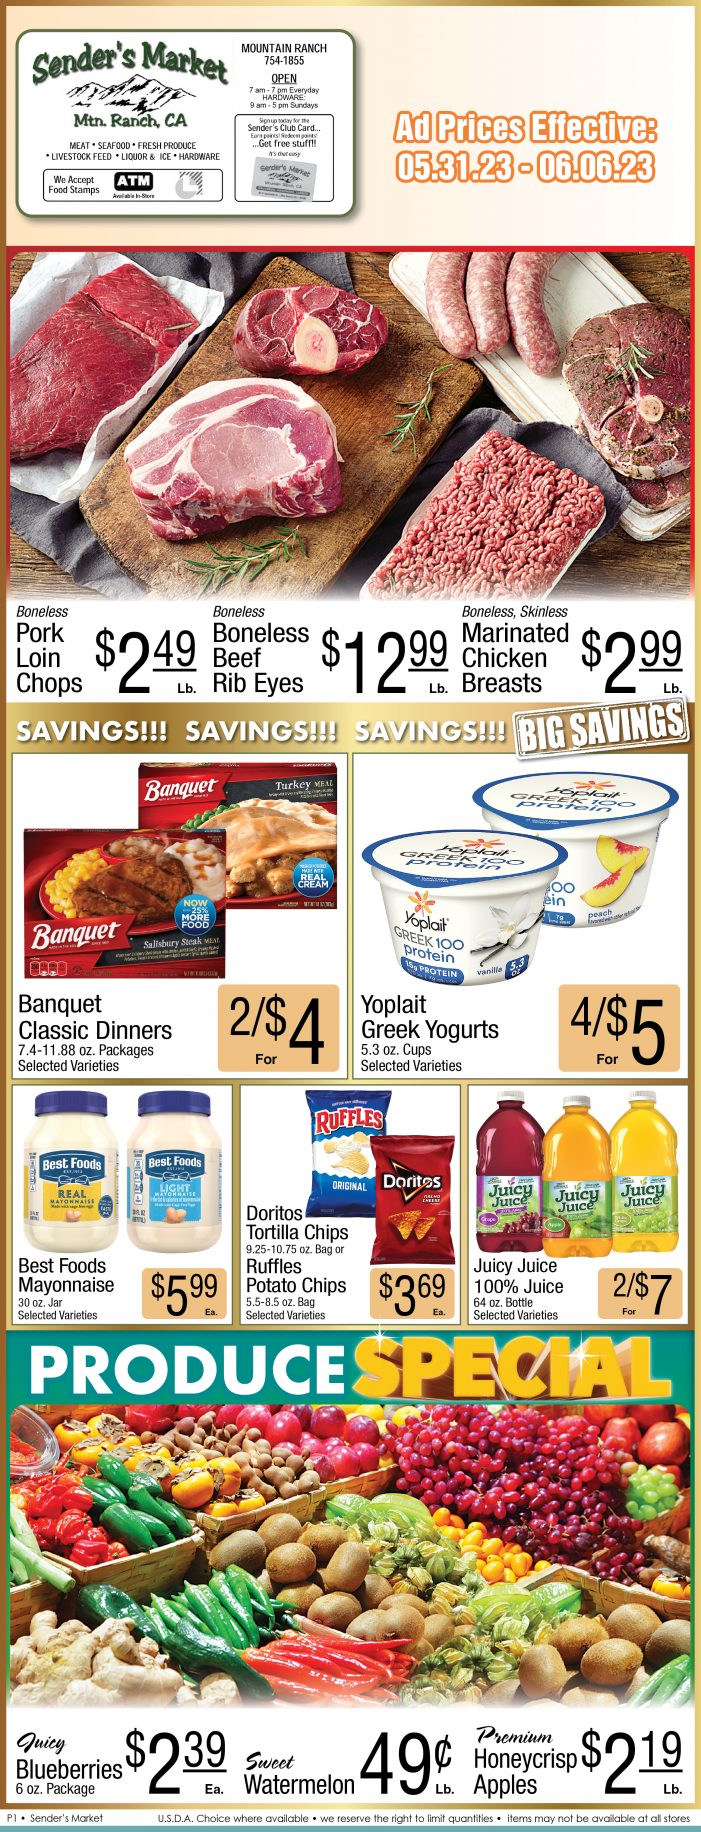 Sender’s Market Weekly Ad & Grocery Specials Through June 6th! Shop Local & Save!!